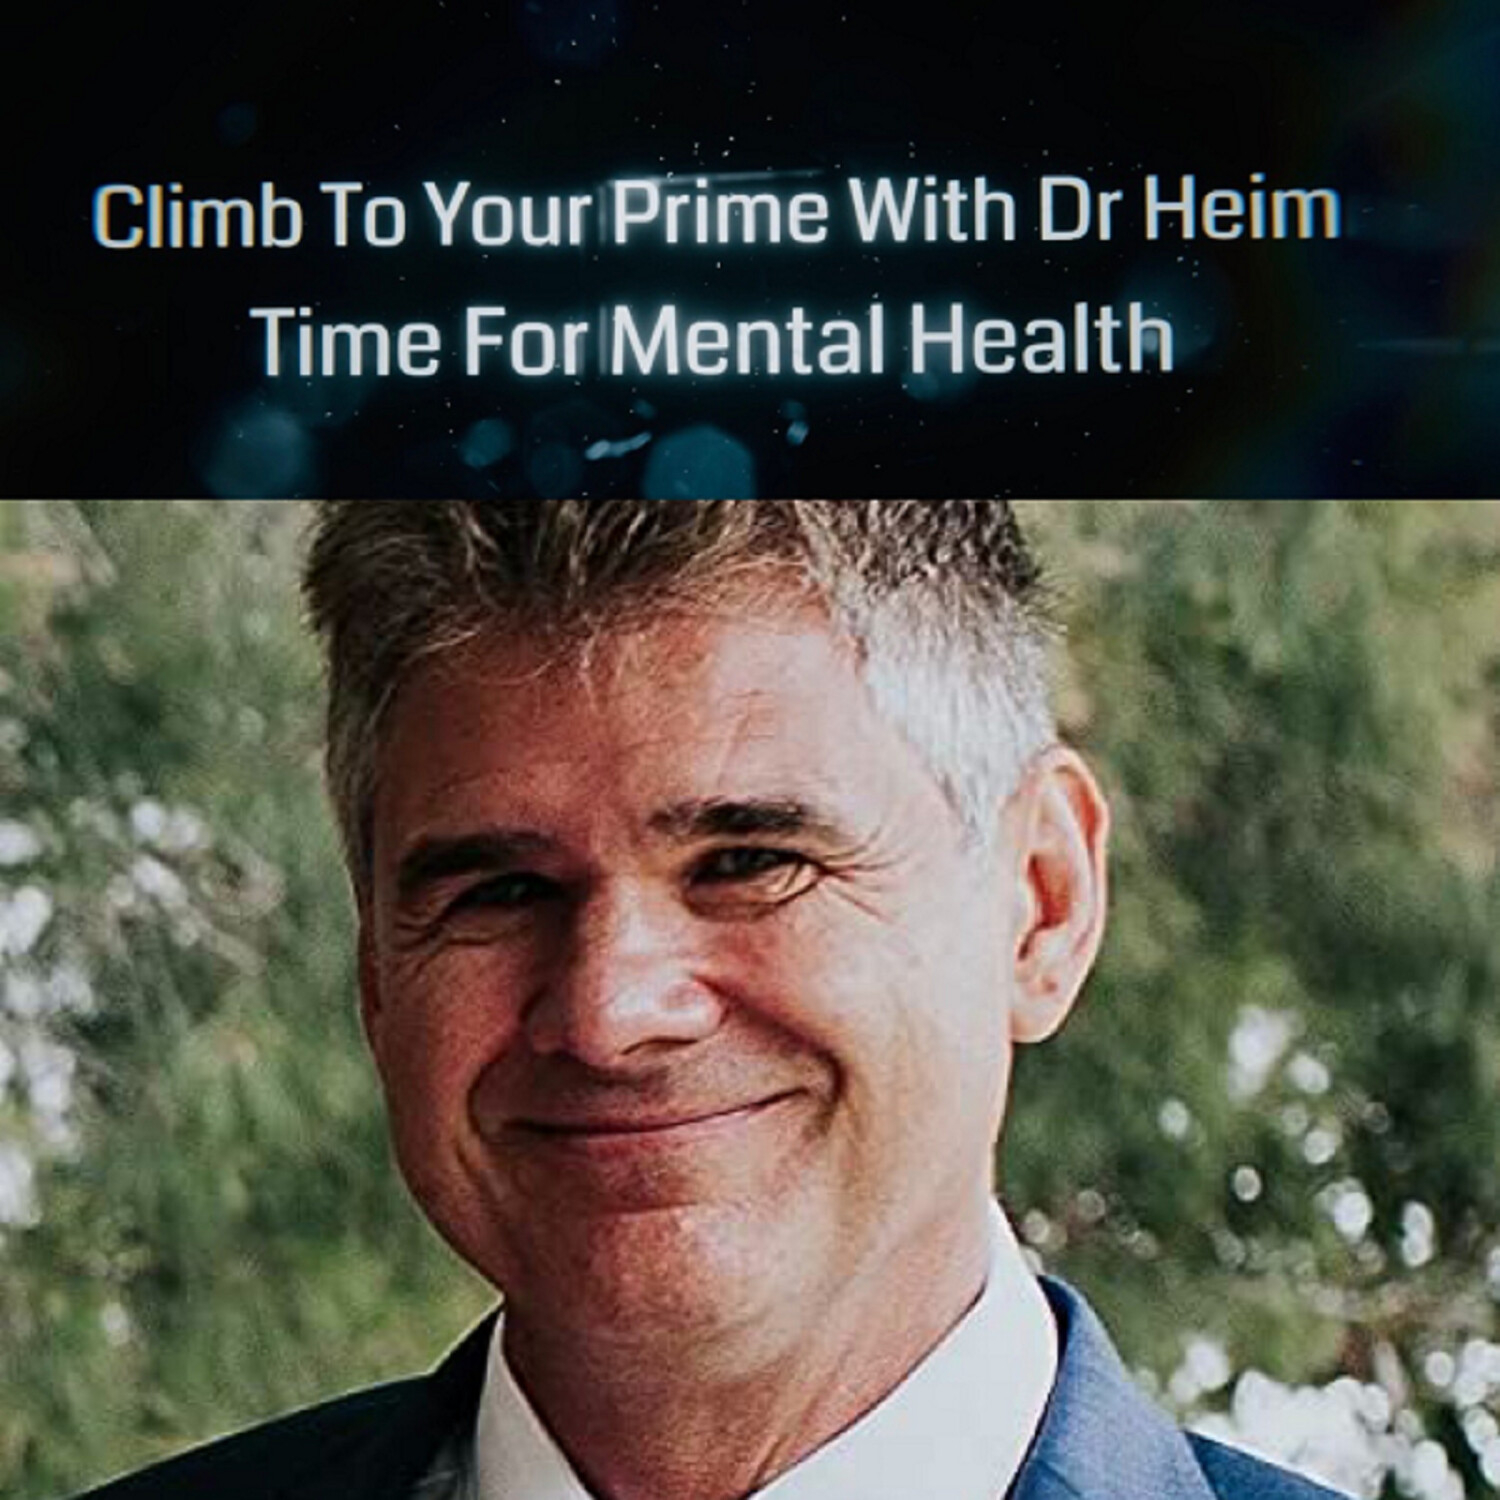 THE EMBC NETWORK WITH HURRICANE H Climb to your Prime with Dr. Heim Season 3 EP2